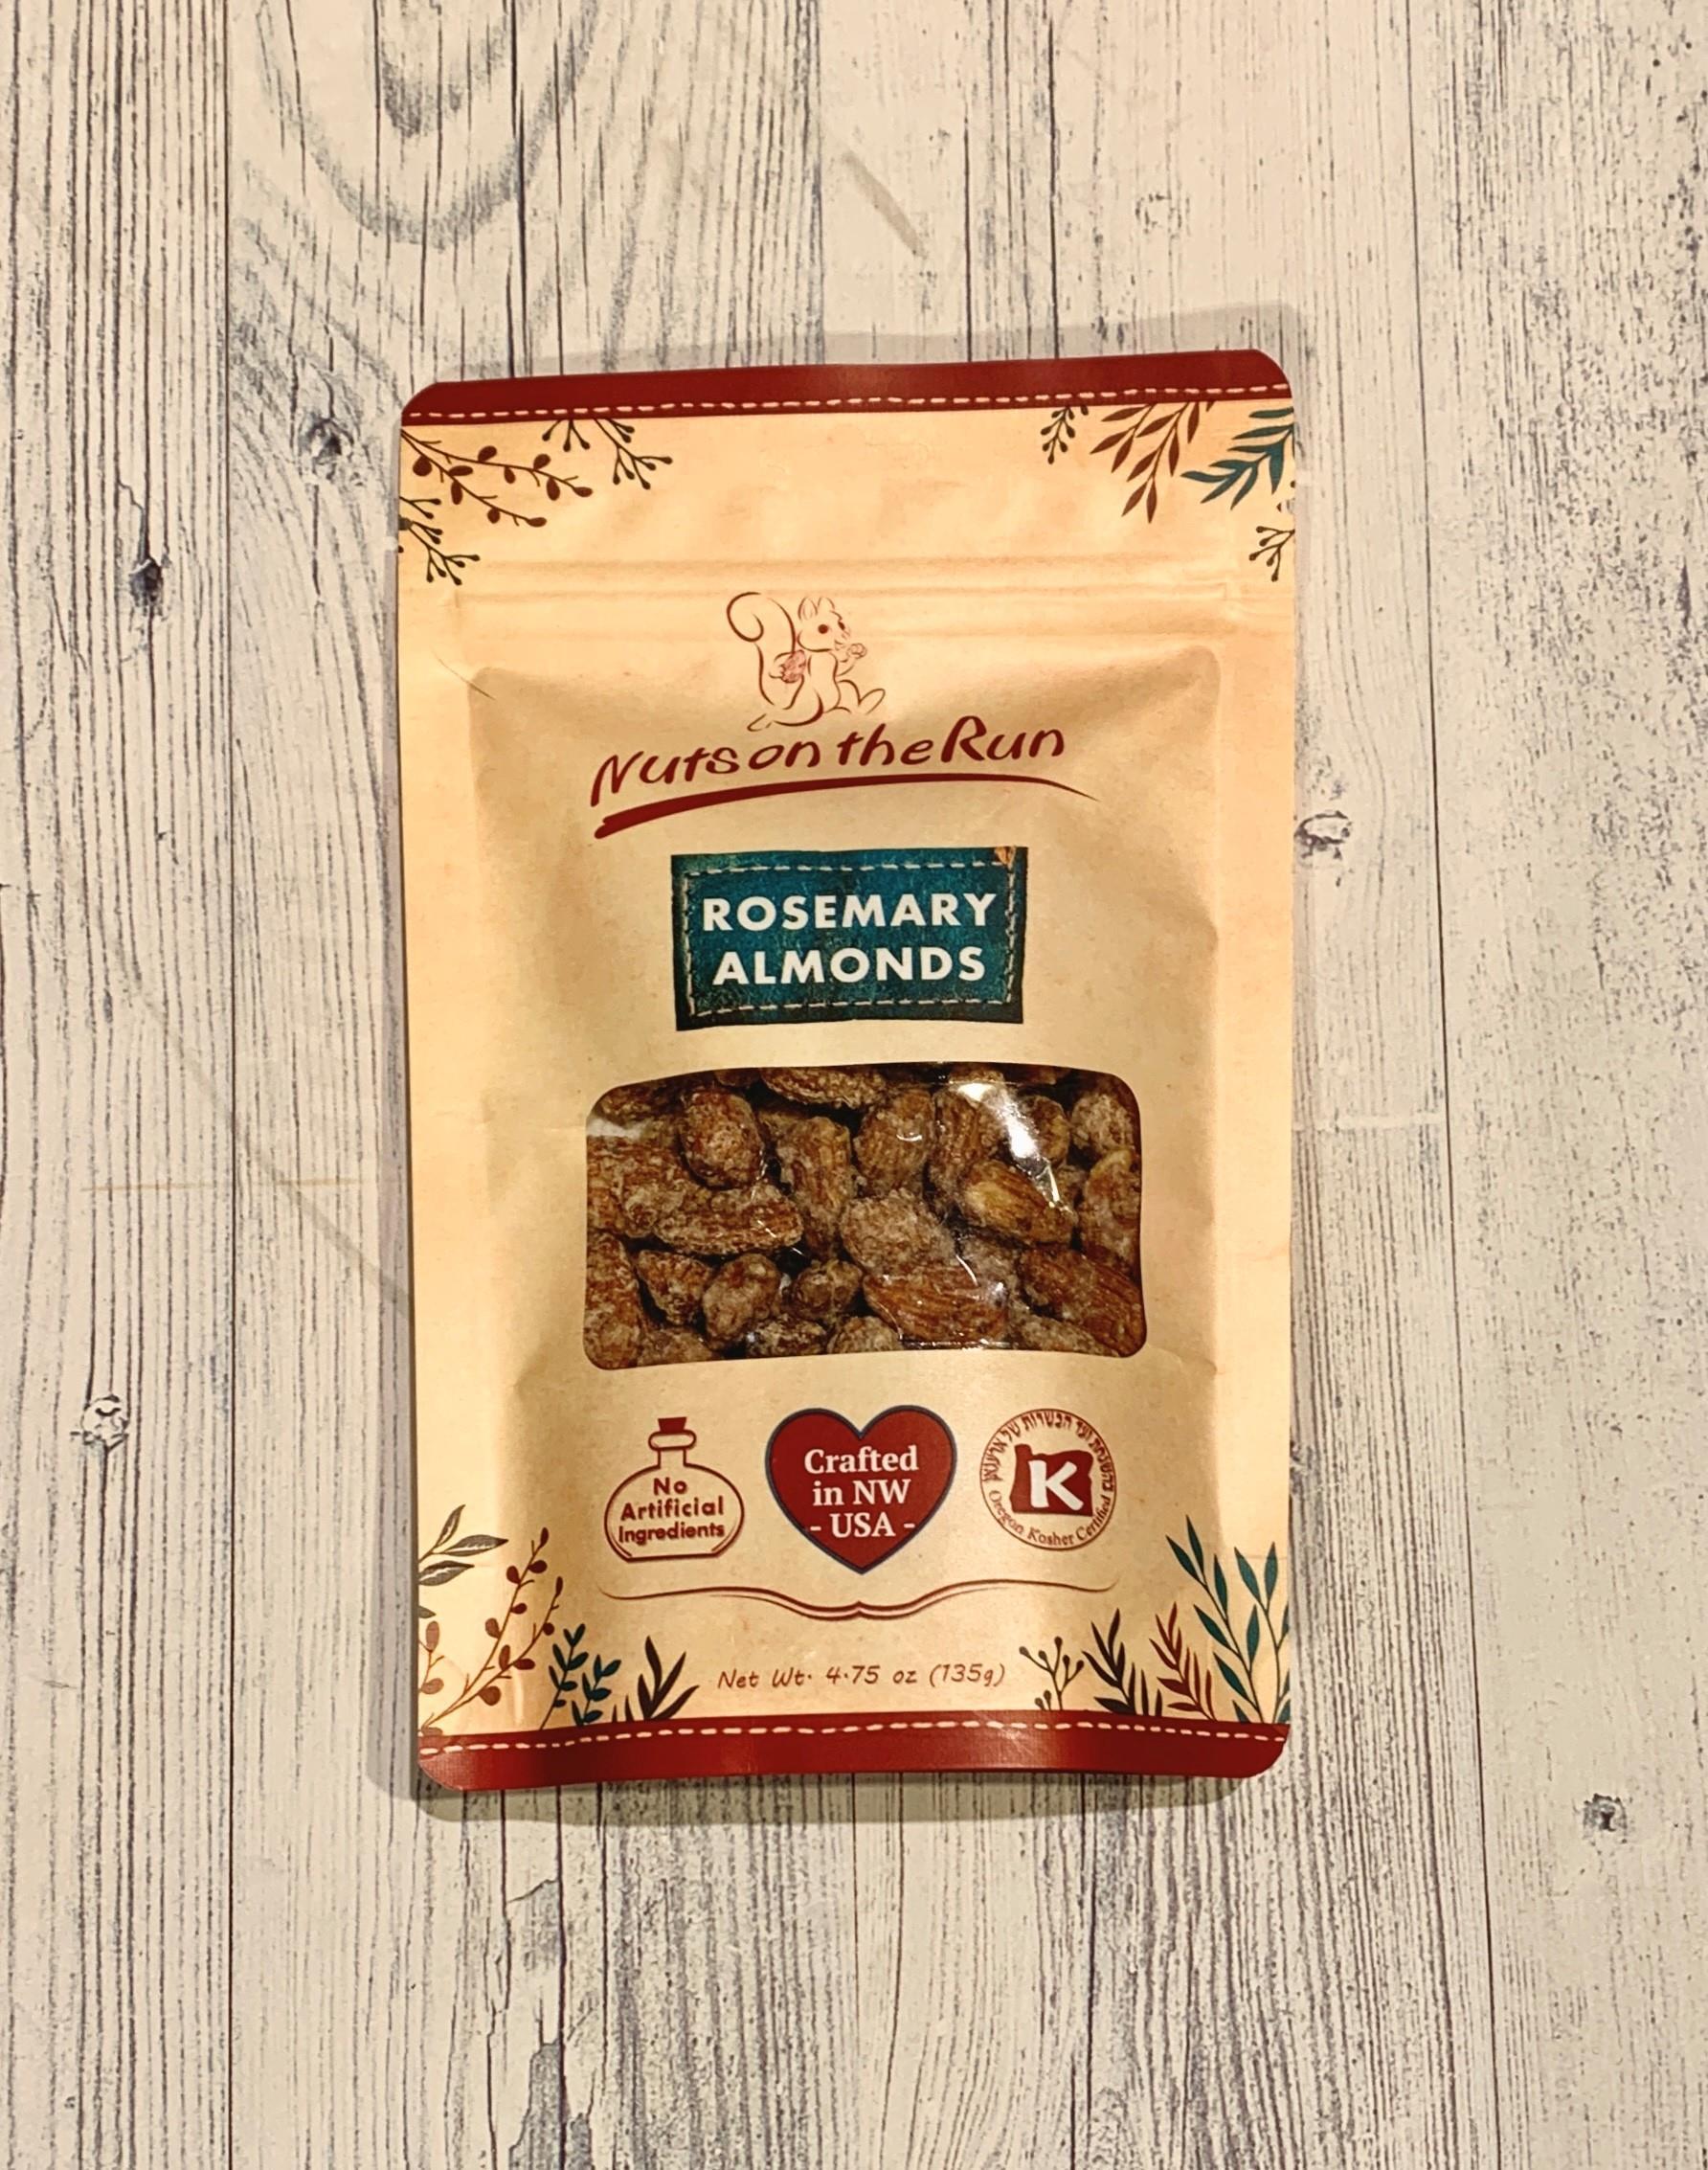 Nuts on the Run Rosemary Almonds 4.75oz NWFG - Nuts on the Run